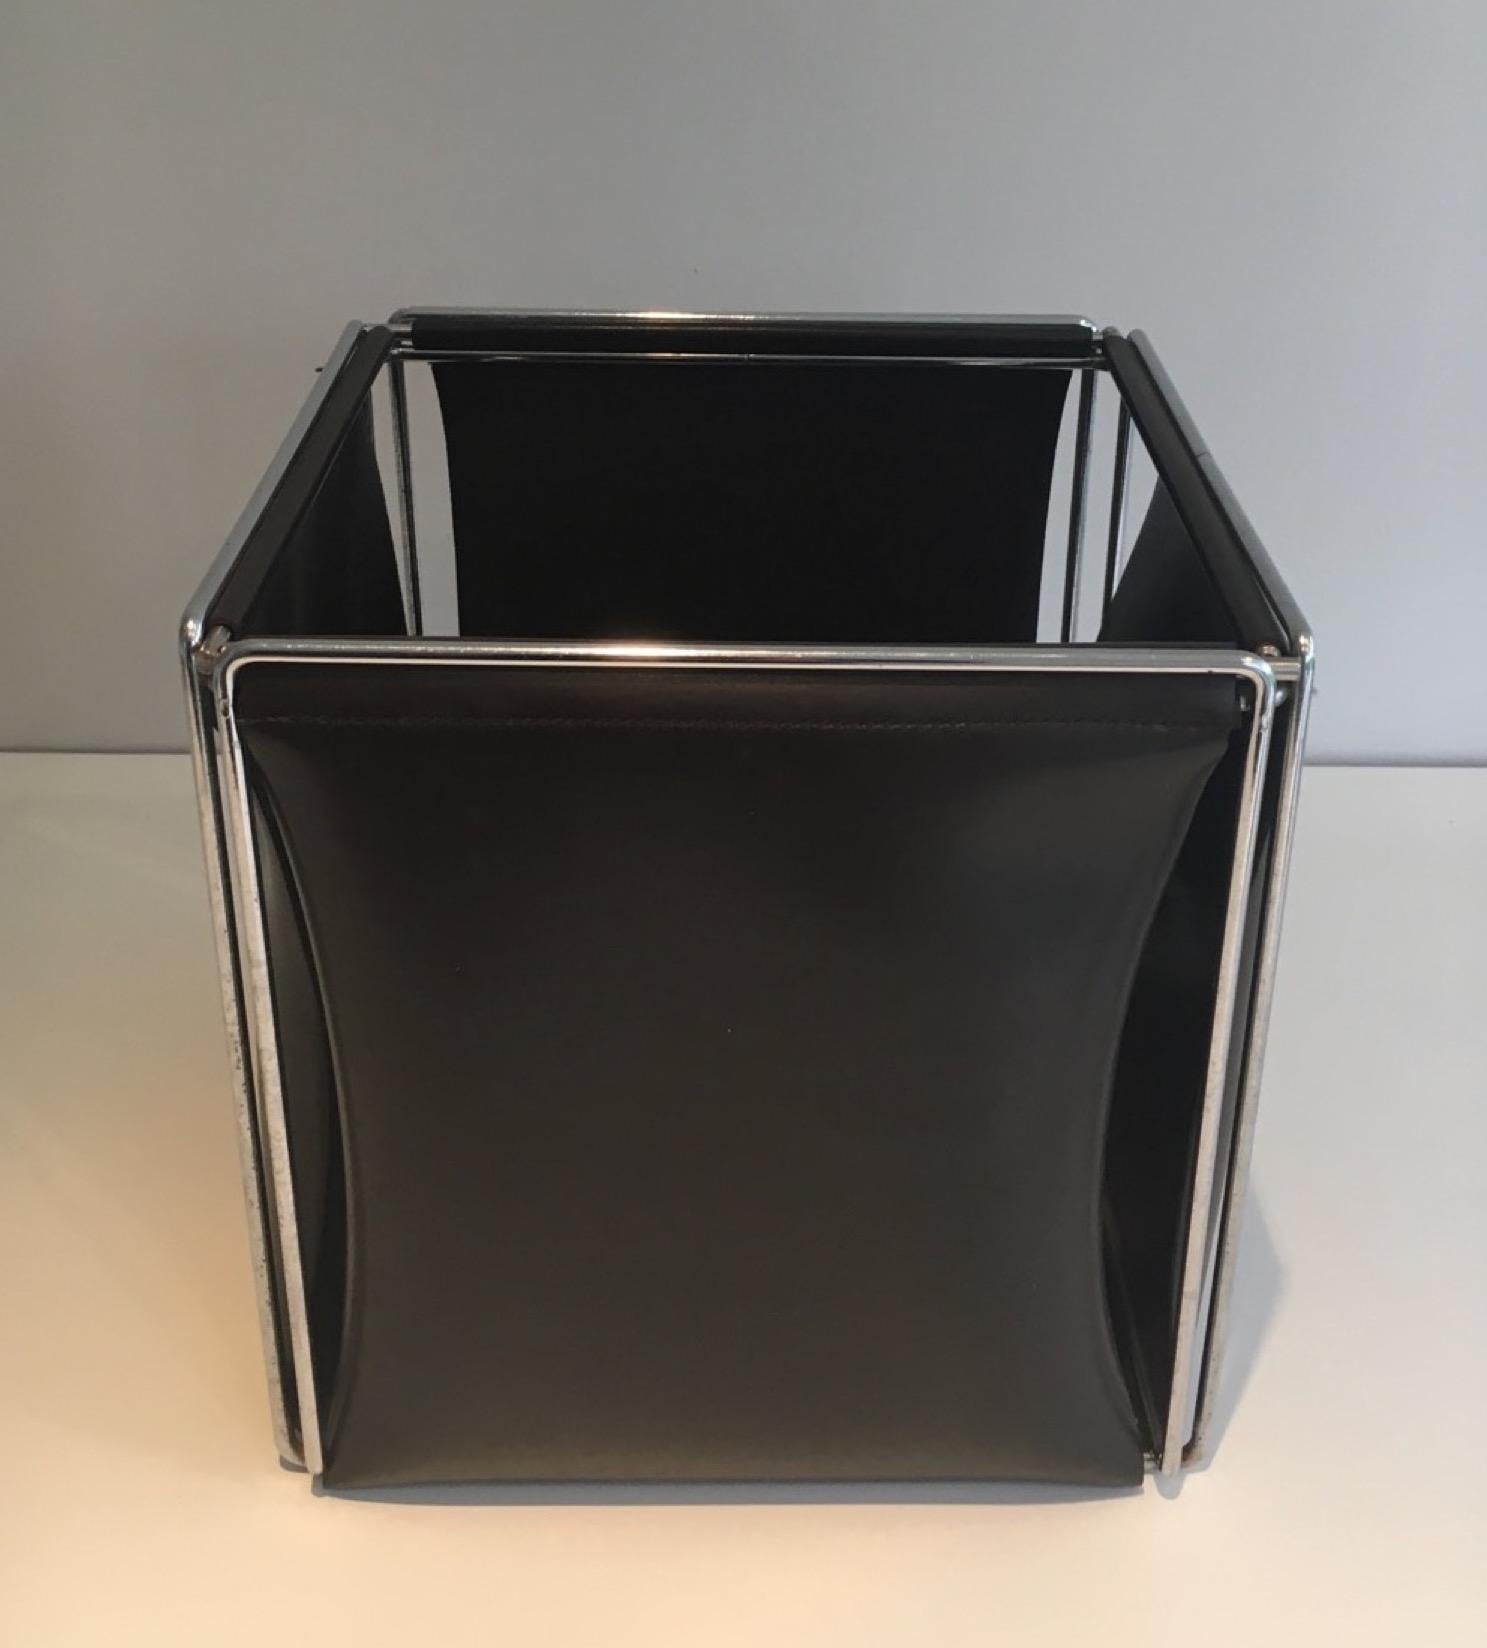 Mid-Century Modern Chrome and Faux-Leather Waste Paper Basket, French Work, Circa 1970 For Sale